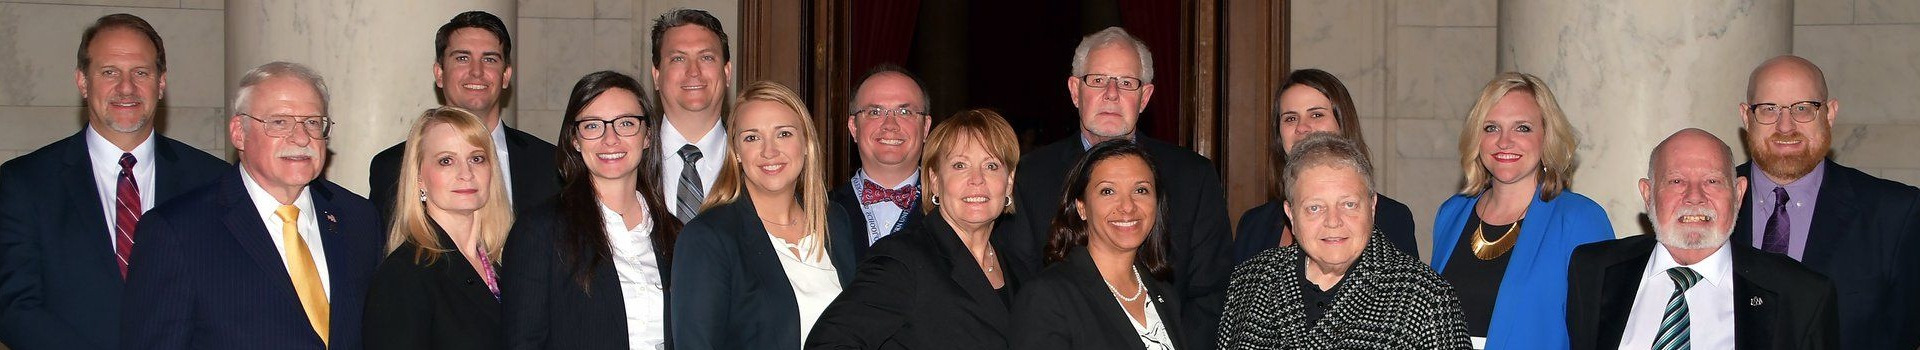 Photograph: Washburn Law alumni and faculty sworn-in at the 2019 United States Supreme Court Bar Swearing-in.